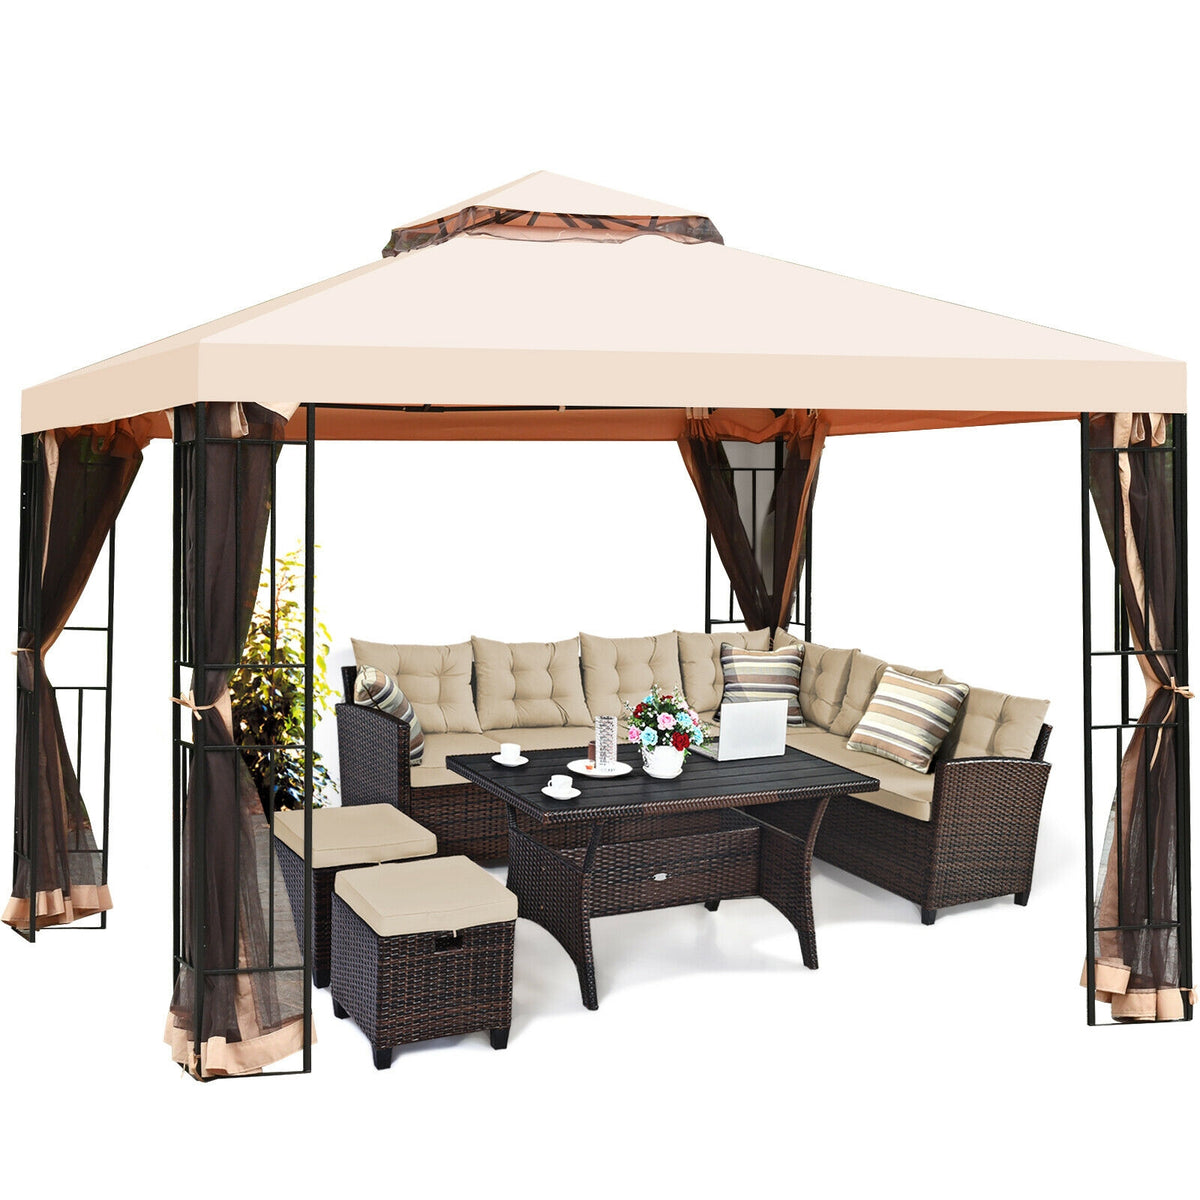 Hikidspace 10 x 10 ft 2-Tier Vented Metal Gazebo Canopy with Mosquito Netting